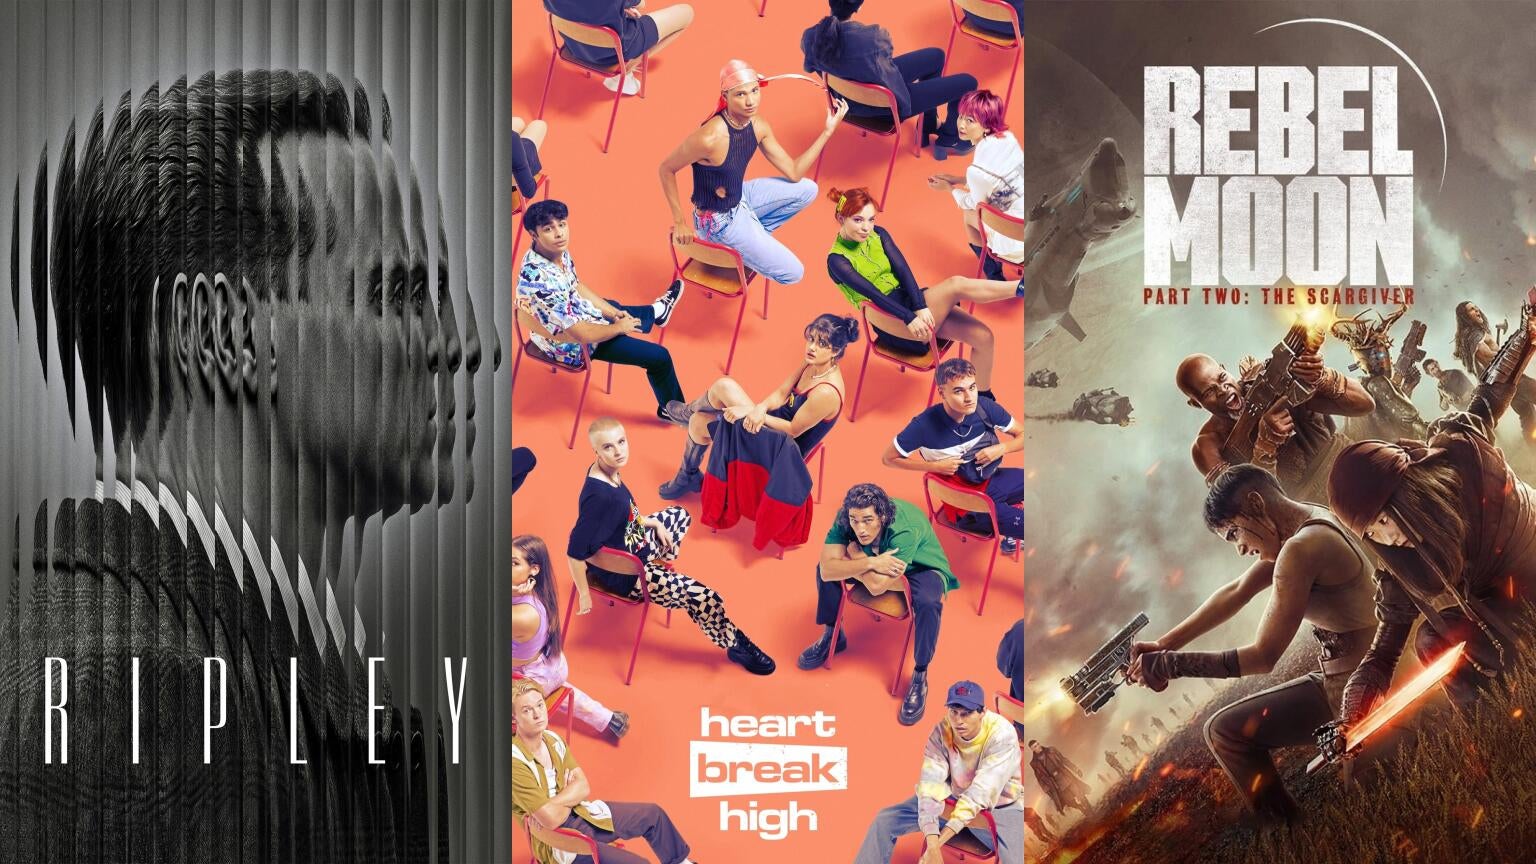 Posters for Netflix's "Ripley," "Heartbreak High," and "Rebel Moon - Part Two: The Scargiver"